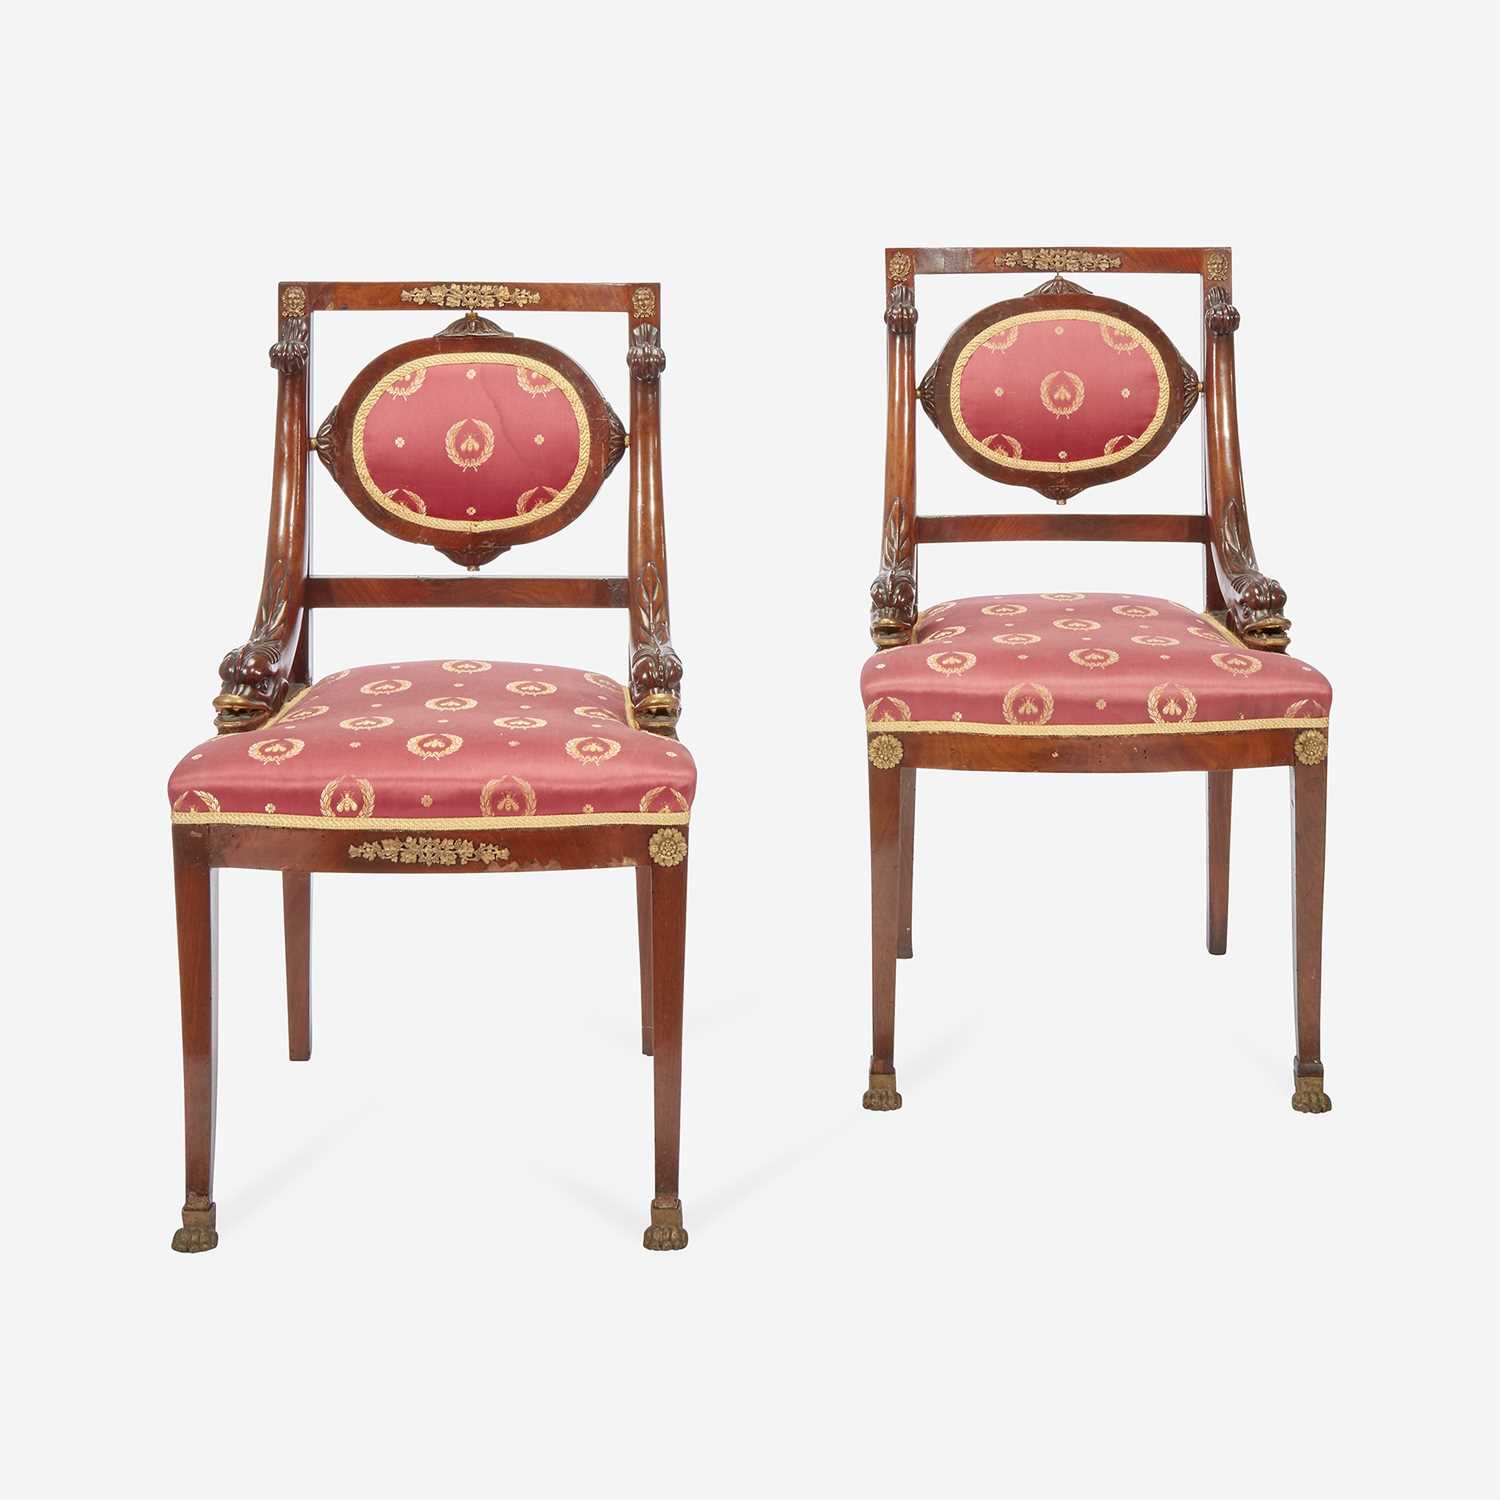 Lot 44 - A Pair of Louis Phillippe Ormolu-Mounted Mahogany Bergeres